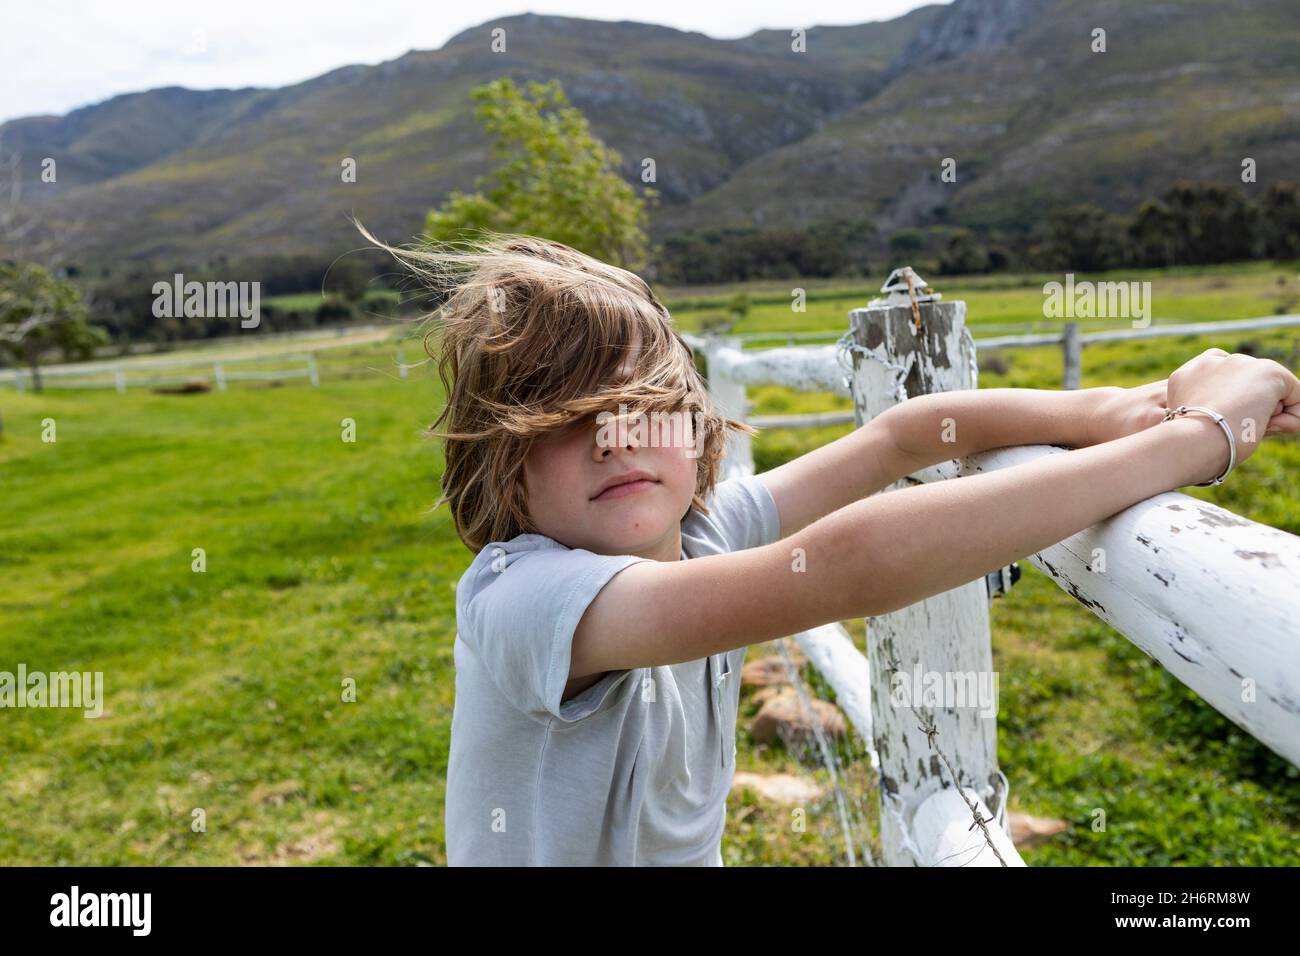 Eight year old boy leaning on a fence, looking at horses in a field Stock Photo